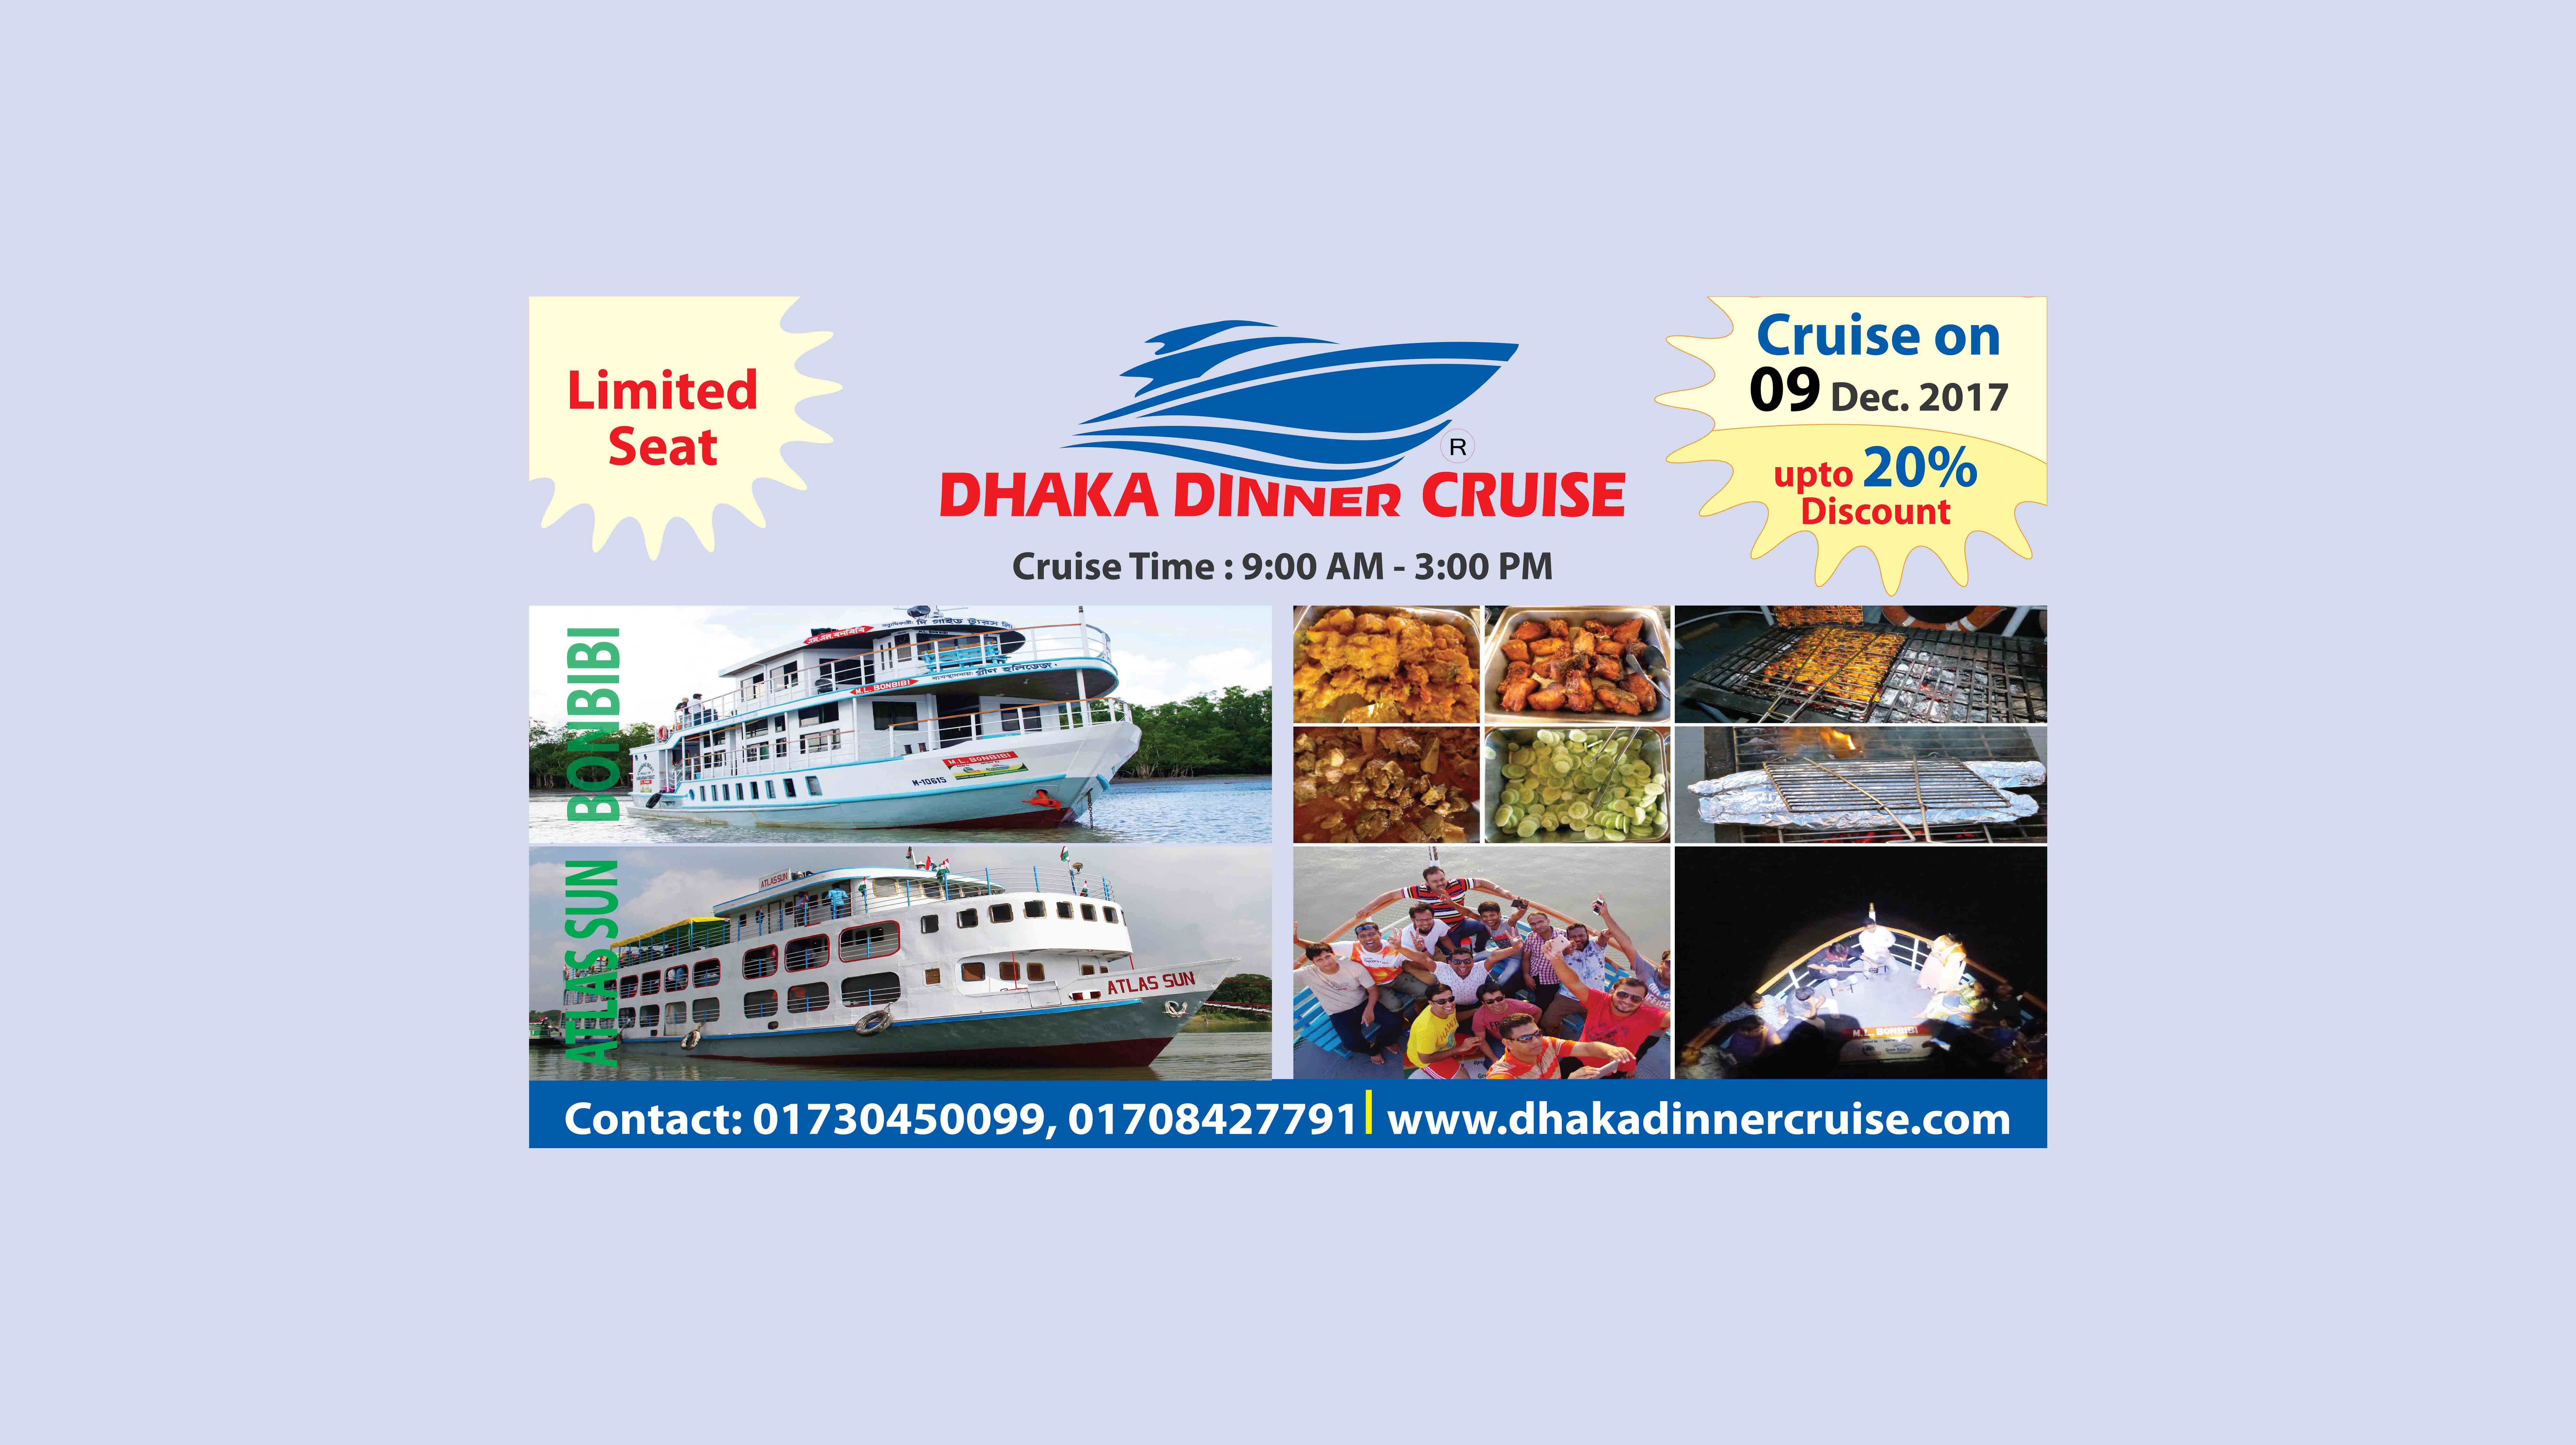 Cruise on 09 December 2017 (Get up to 20% Discount)